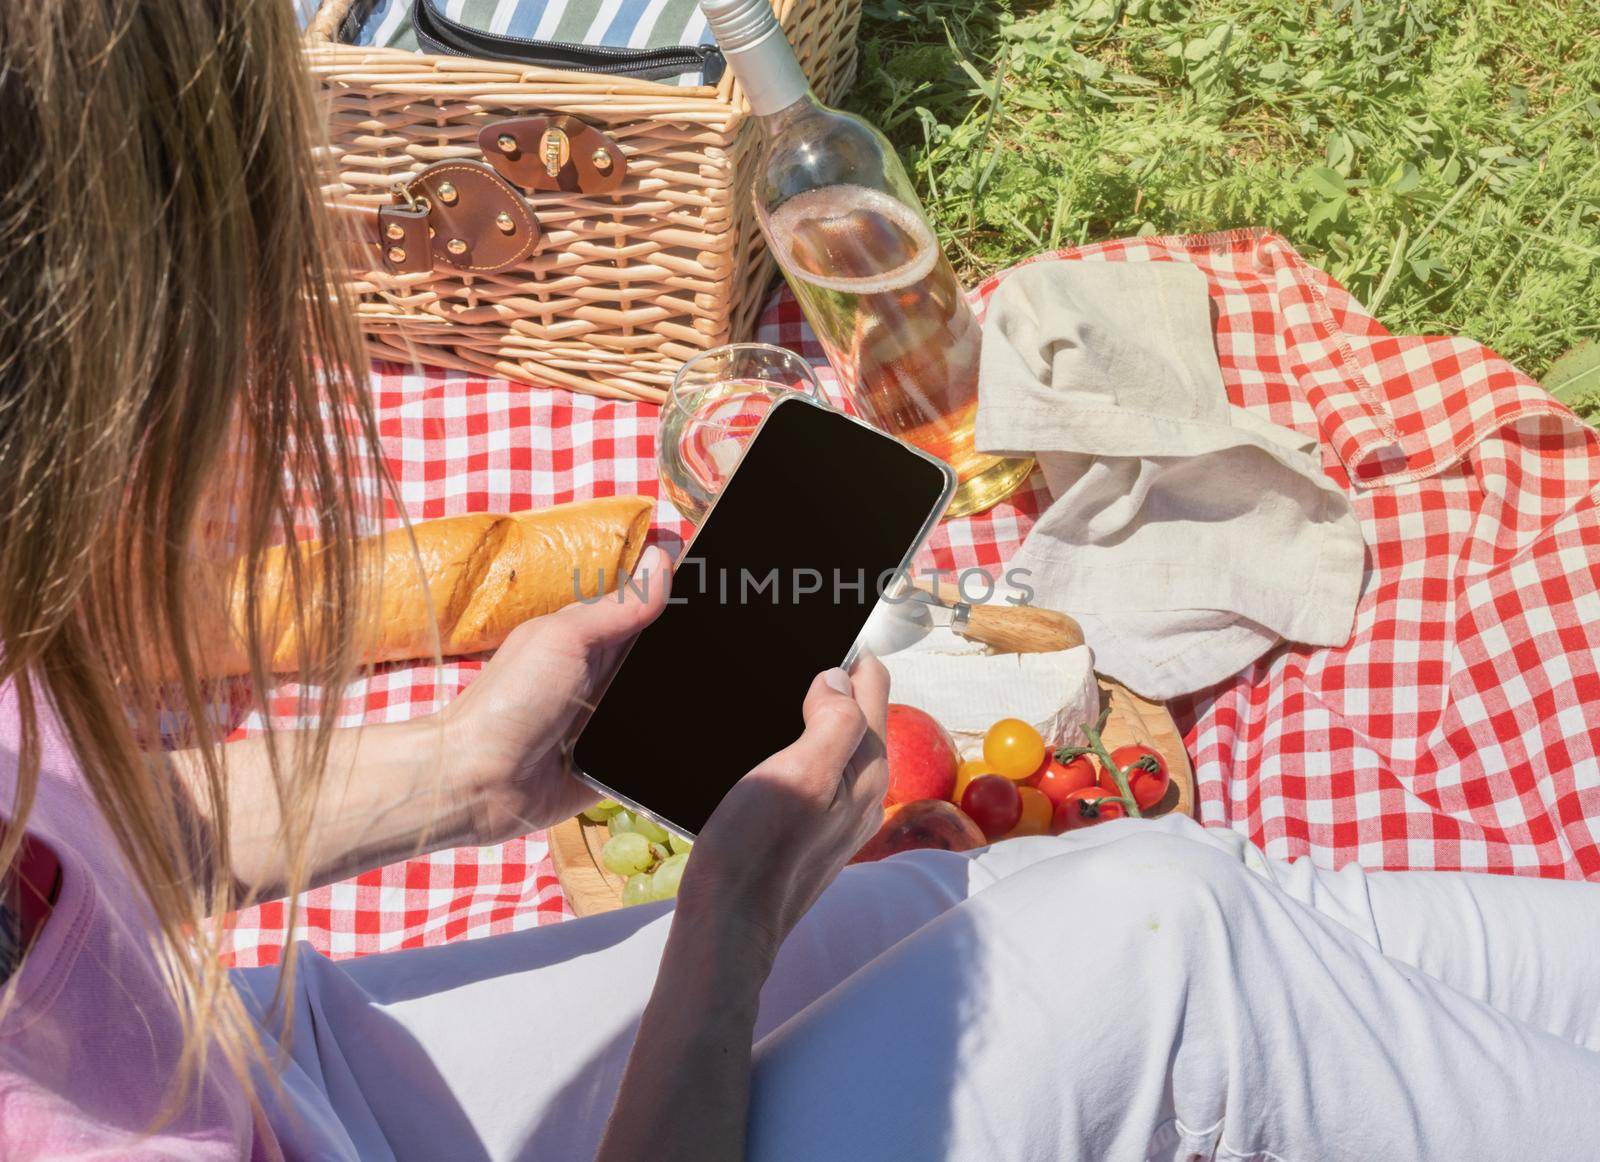 back view of unrecognizable woman in white pants outside having picnic and using smartphone taking photo. Summer fun and leisure. view from behind